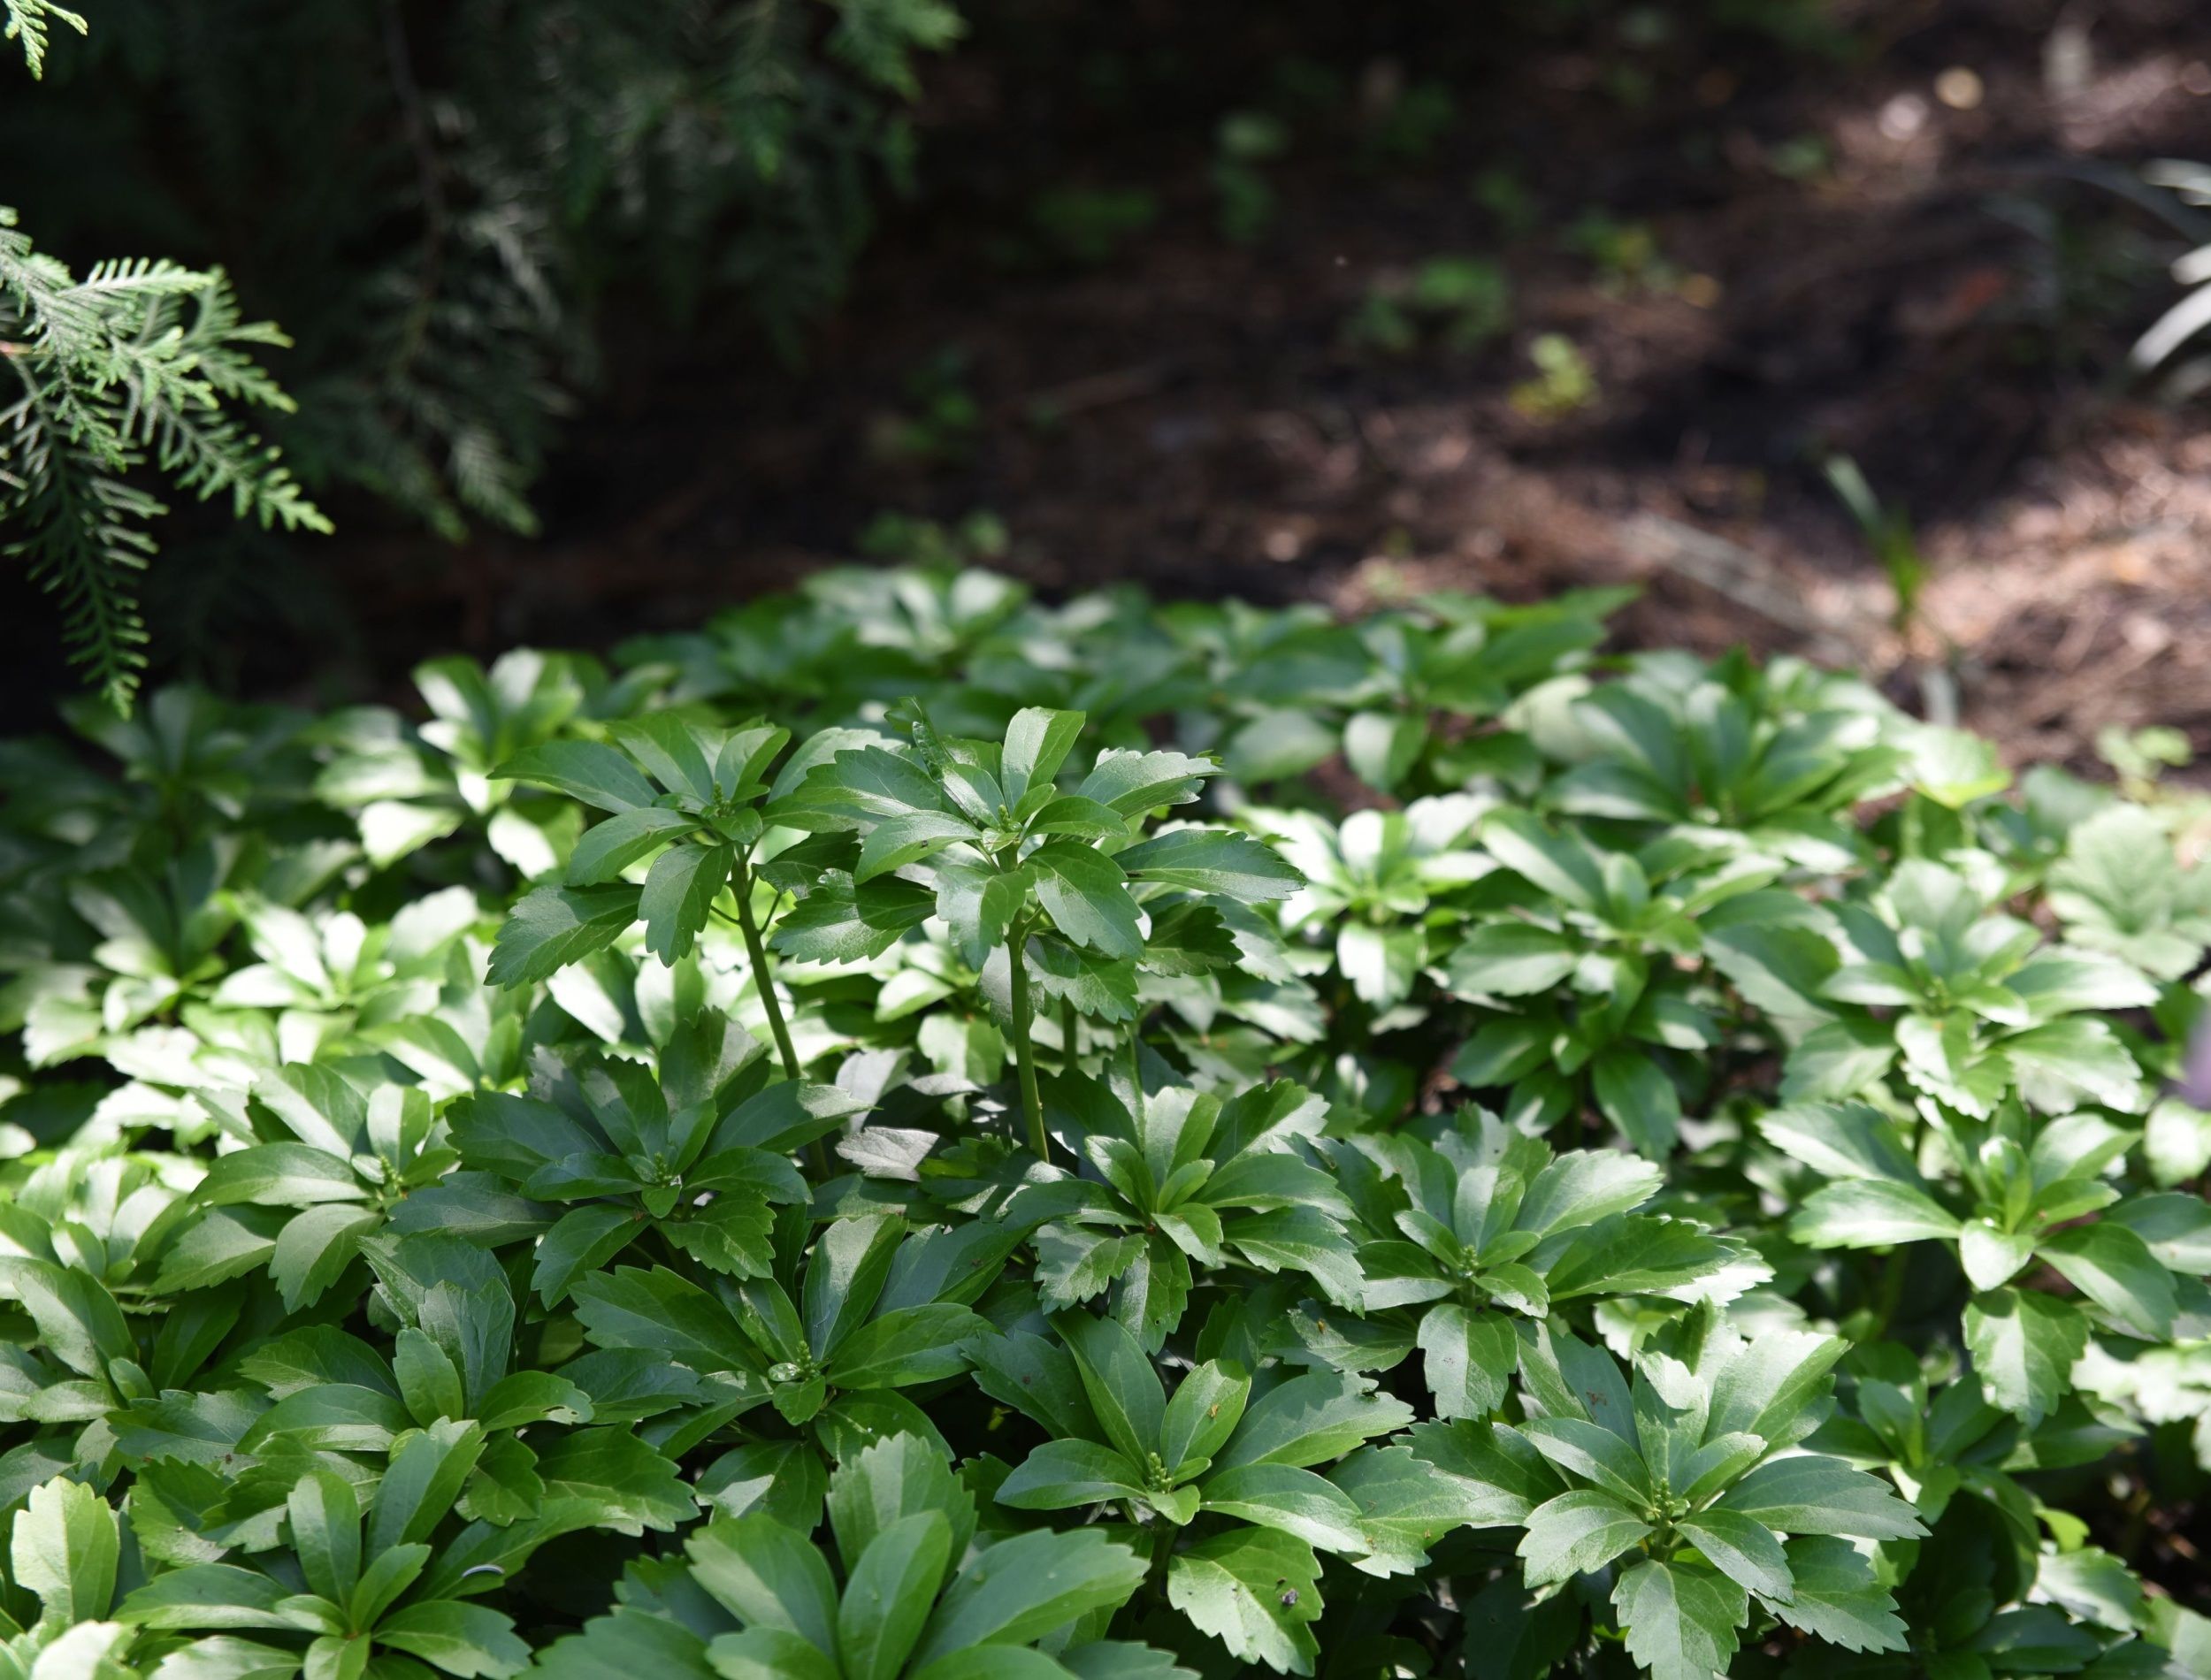 Pachysandra terminalis grows in a shady garden in summer